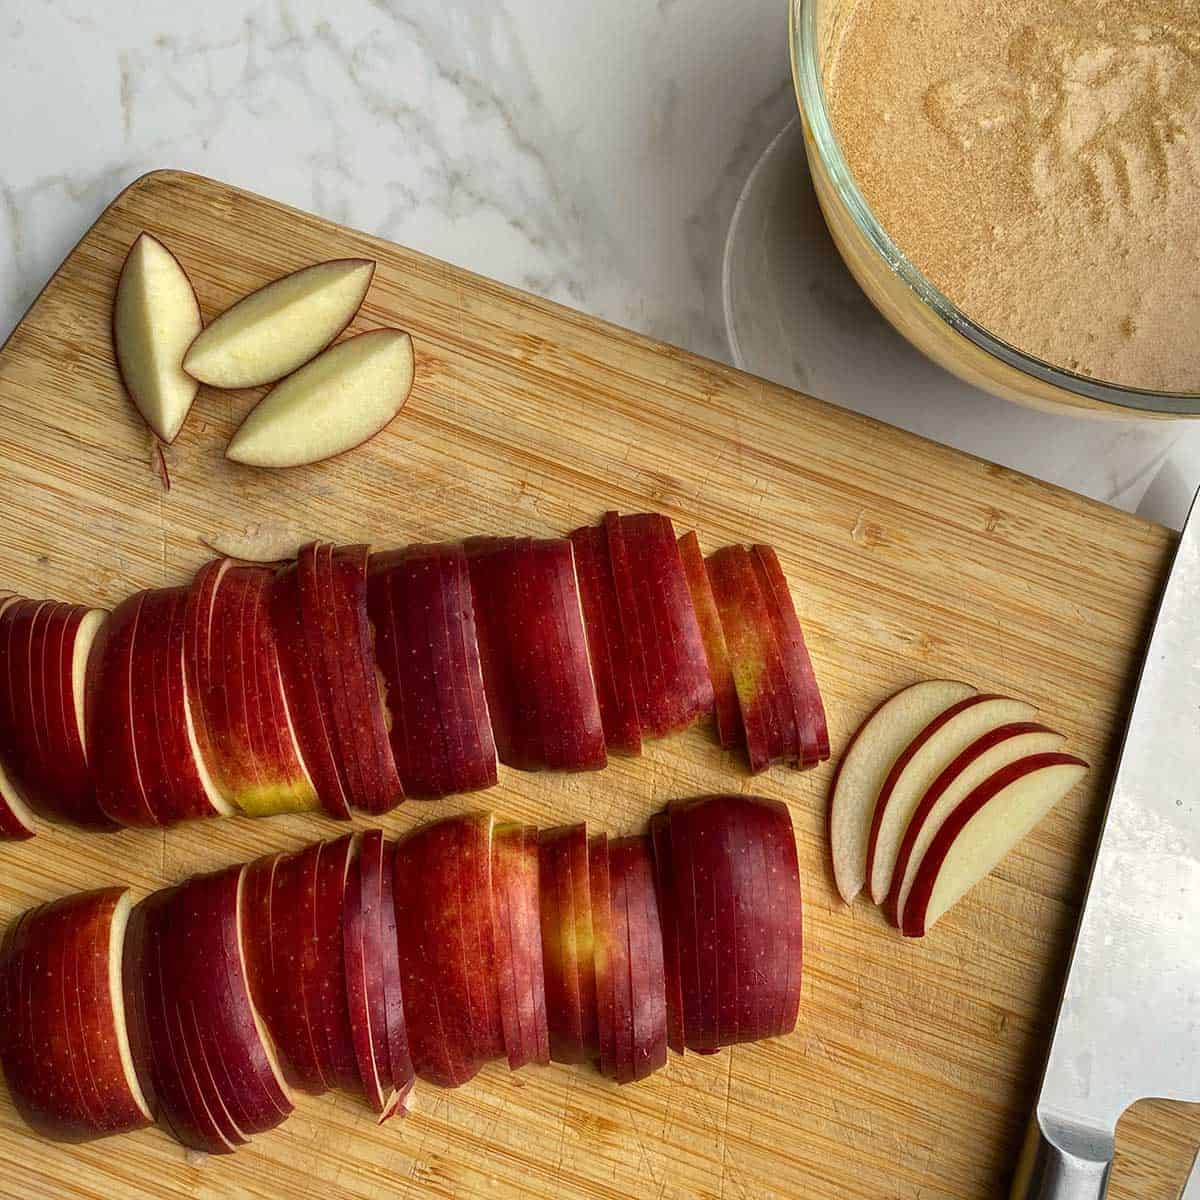 Sliced apples on a wooden chopping board